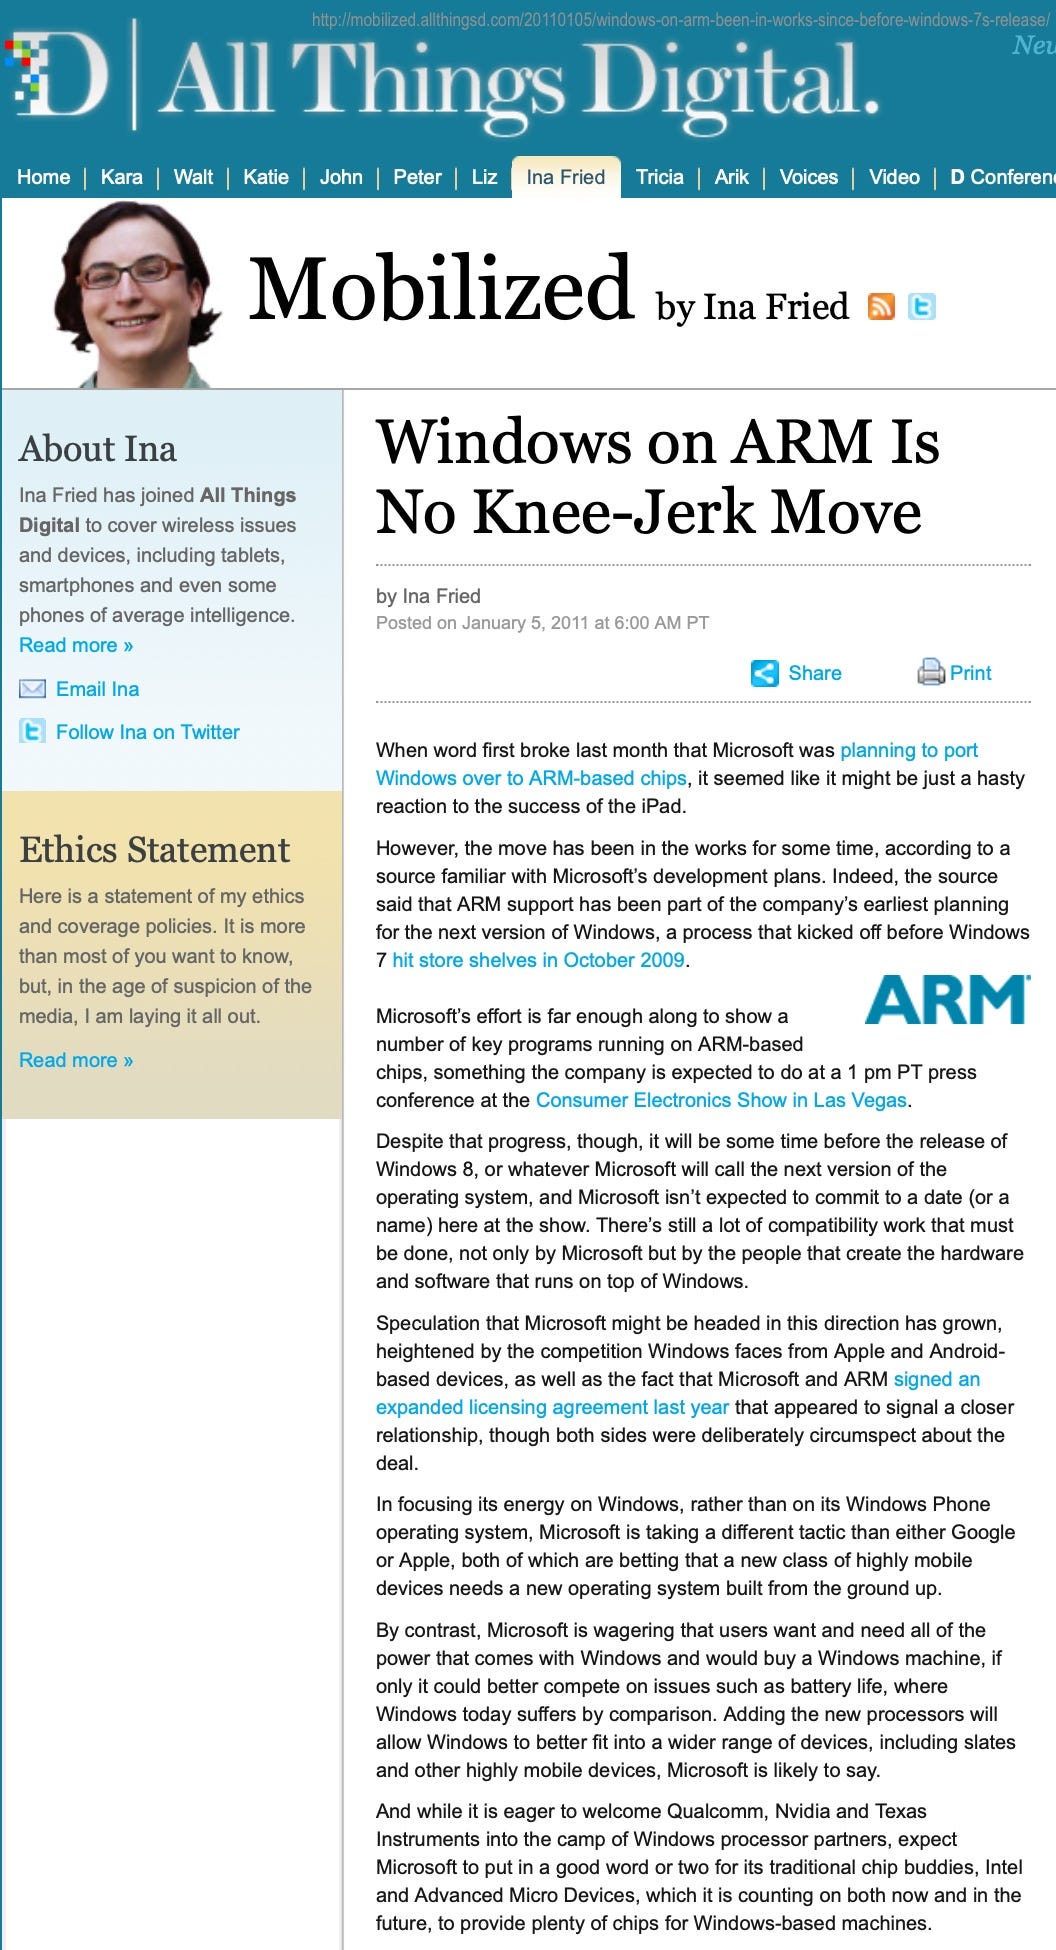 Story from January 5, 2011 "Windows on ARM is No Knee Jerk Move" by Ina Fried.